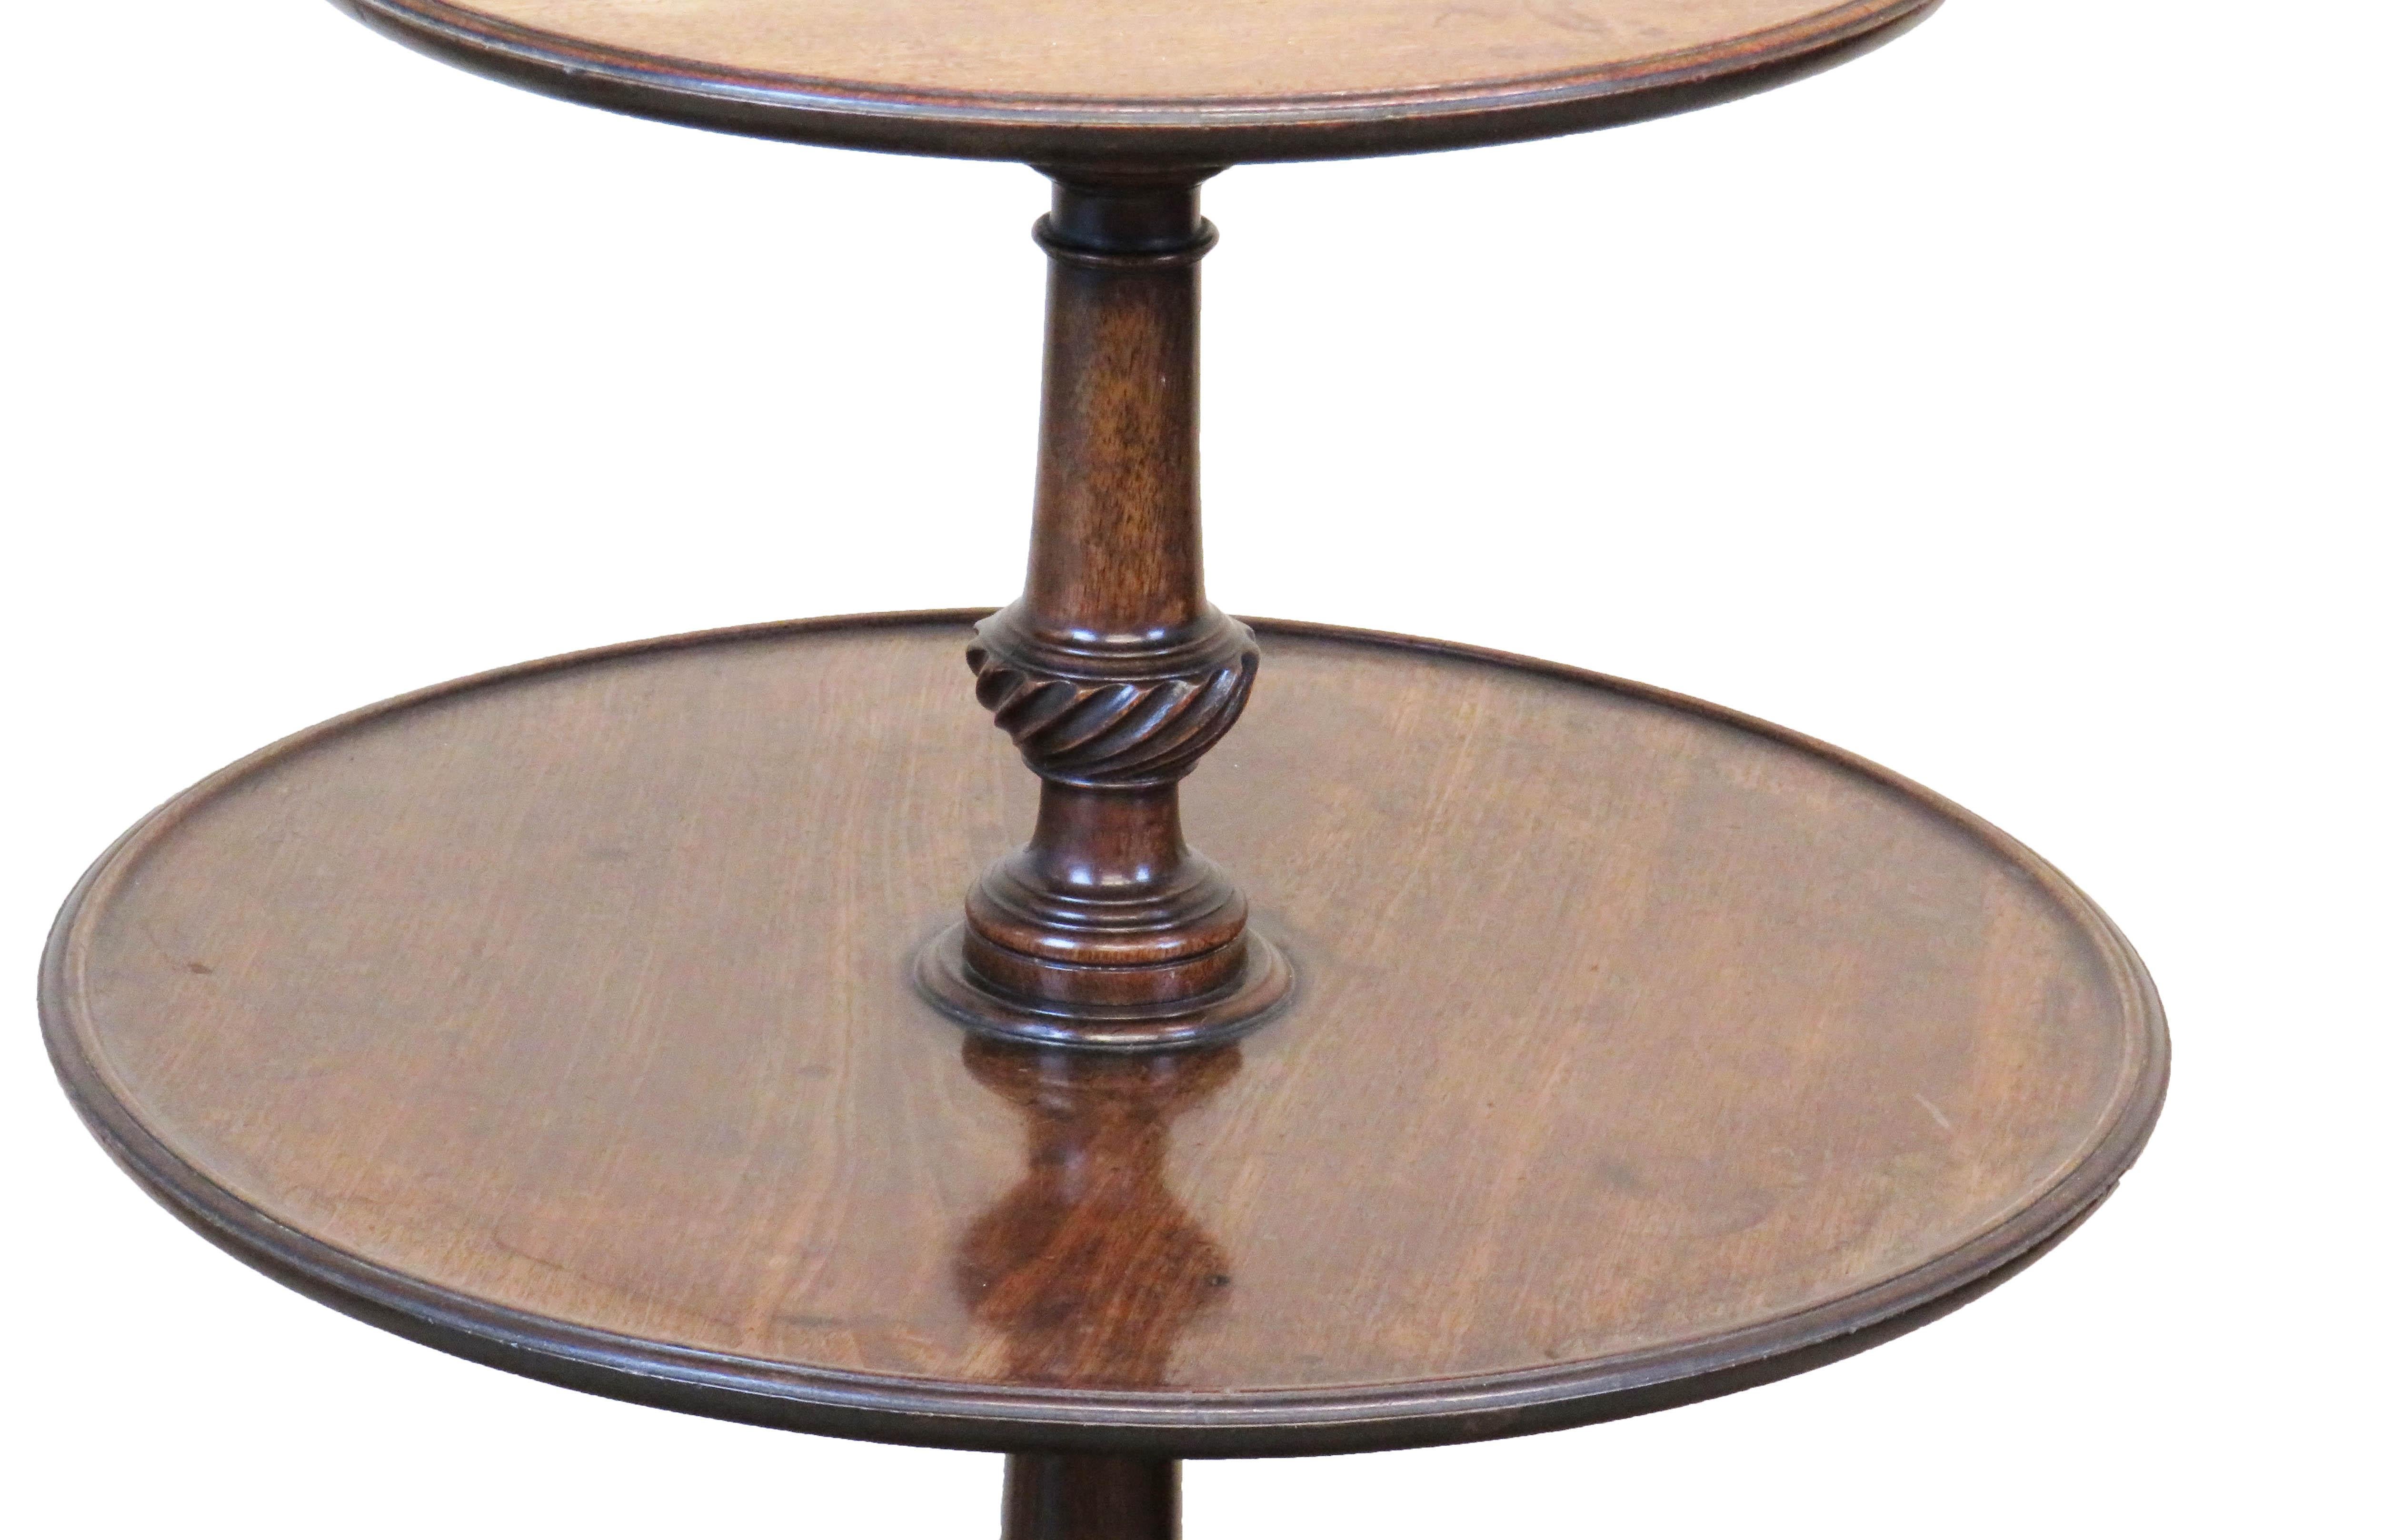 A very good quality 18th century Georgian mahogany dumbwaiter
retaining excellent untouched colour and patina with three graduated
revolving circular dished tiers united by turned central column with
crisply carved decoration raised on elegant